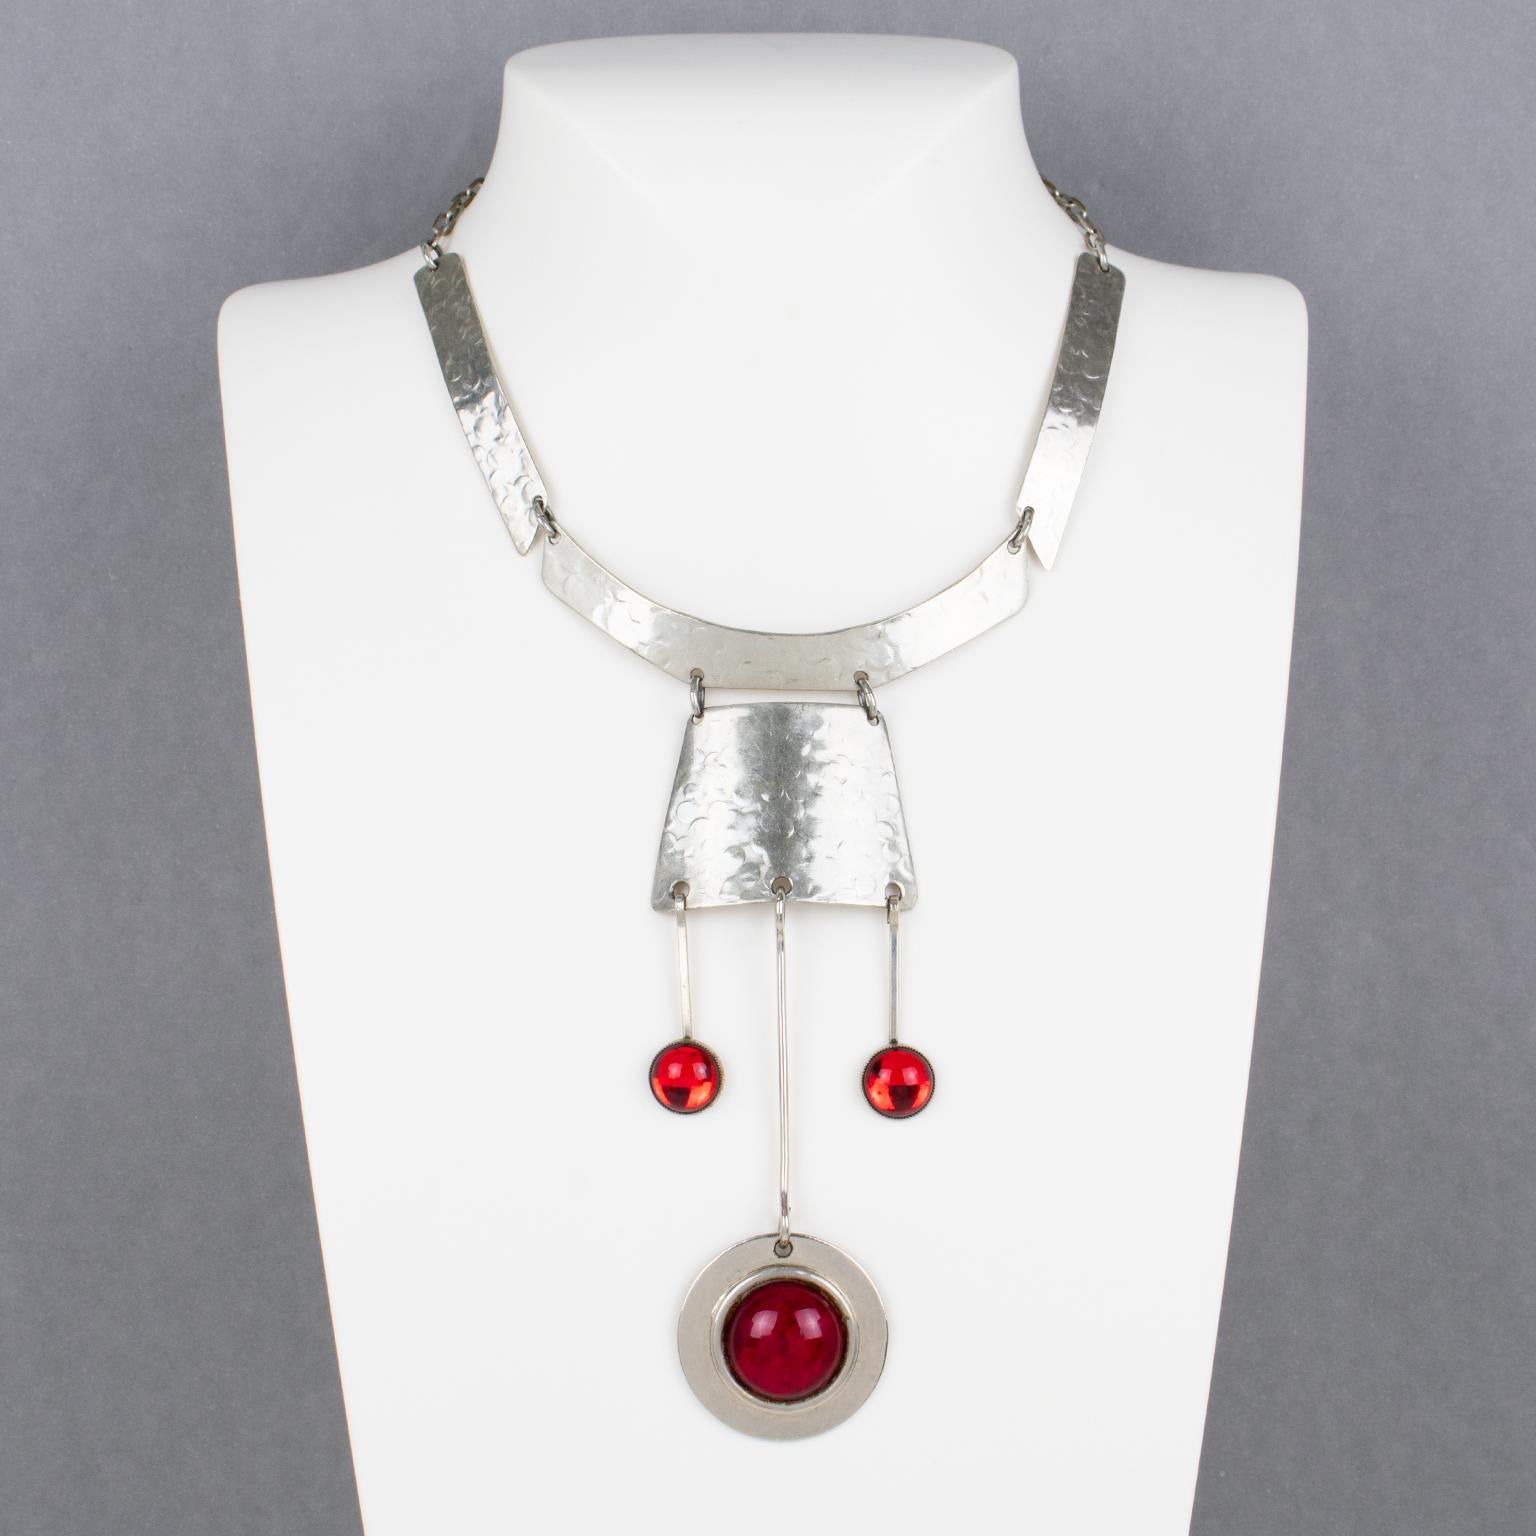 Modernist Space Age Stainless Steel and Red Glass Cabochon Choker Necklace In Good Condition For Sale In Atlanta, GA